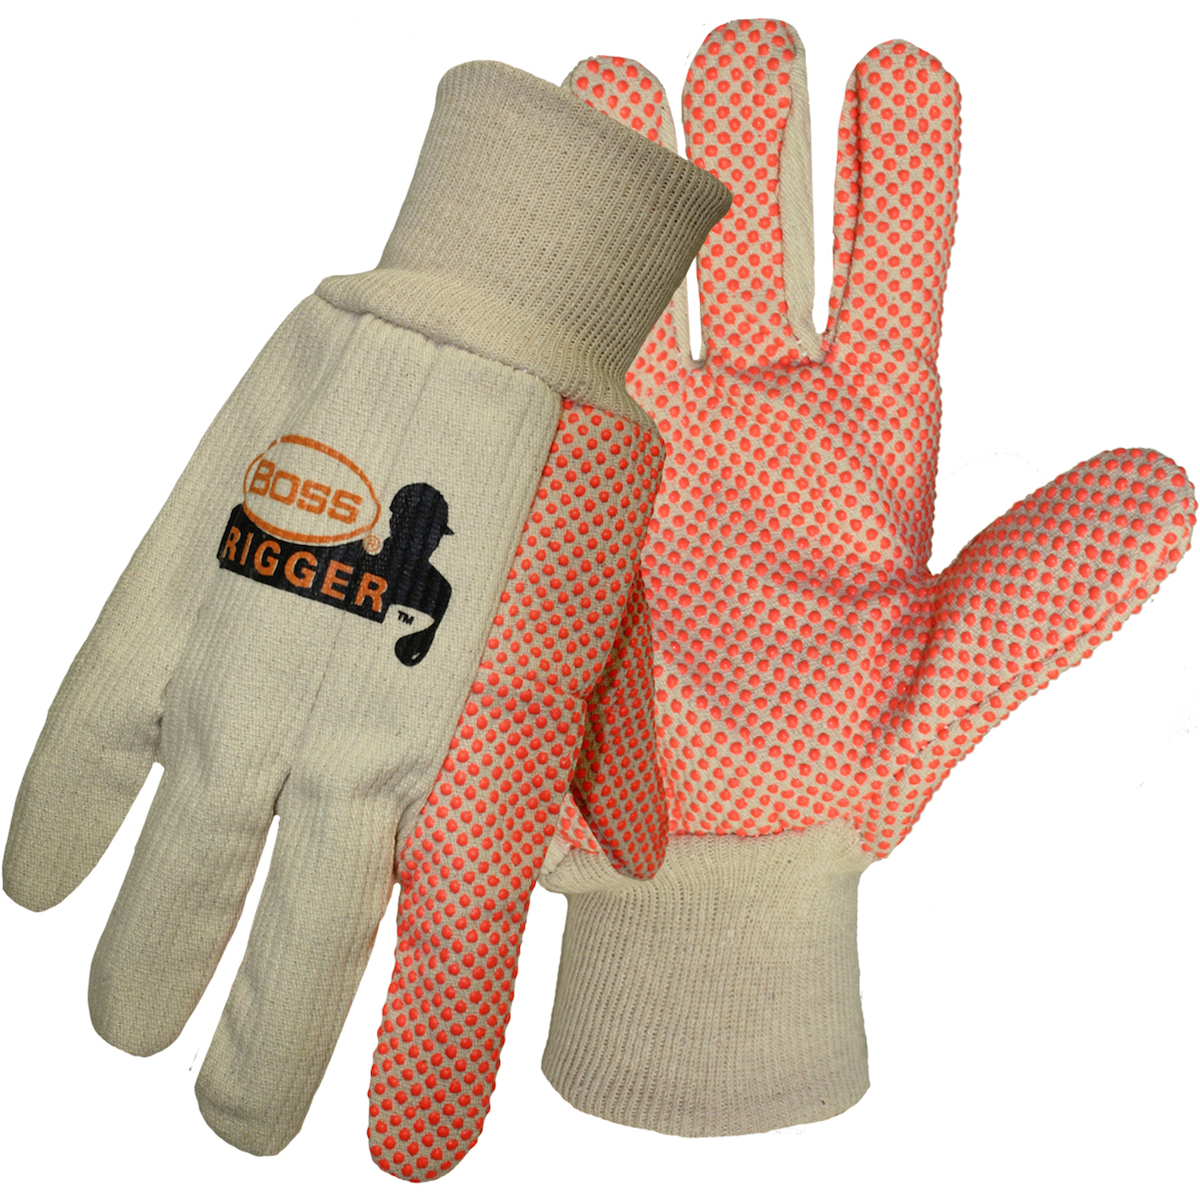 100% COTTON CORDED SINGLE PALM GLOVE WITH PVC DOTTED GRIP ON PALM, THUMB AND INDEX FINGER - HEAVY WEIGHT